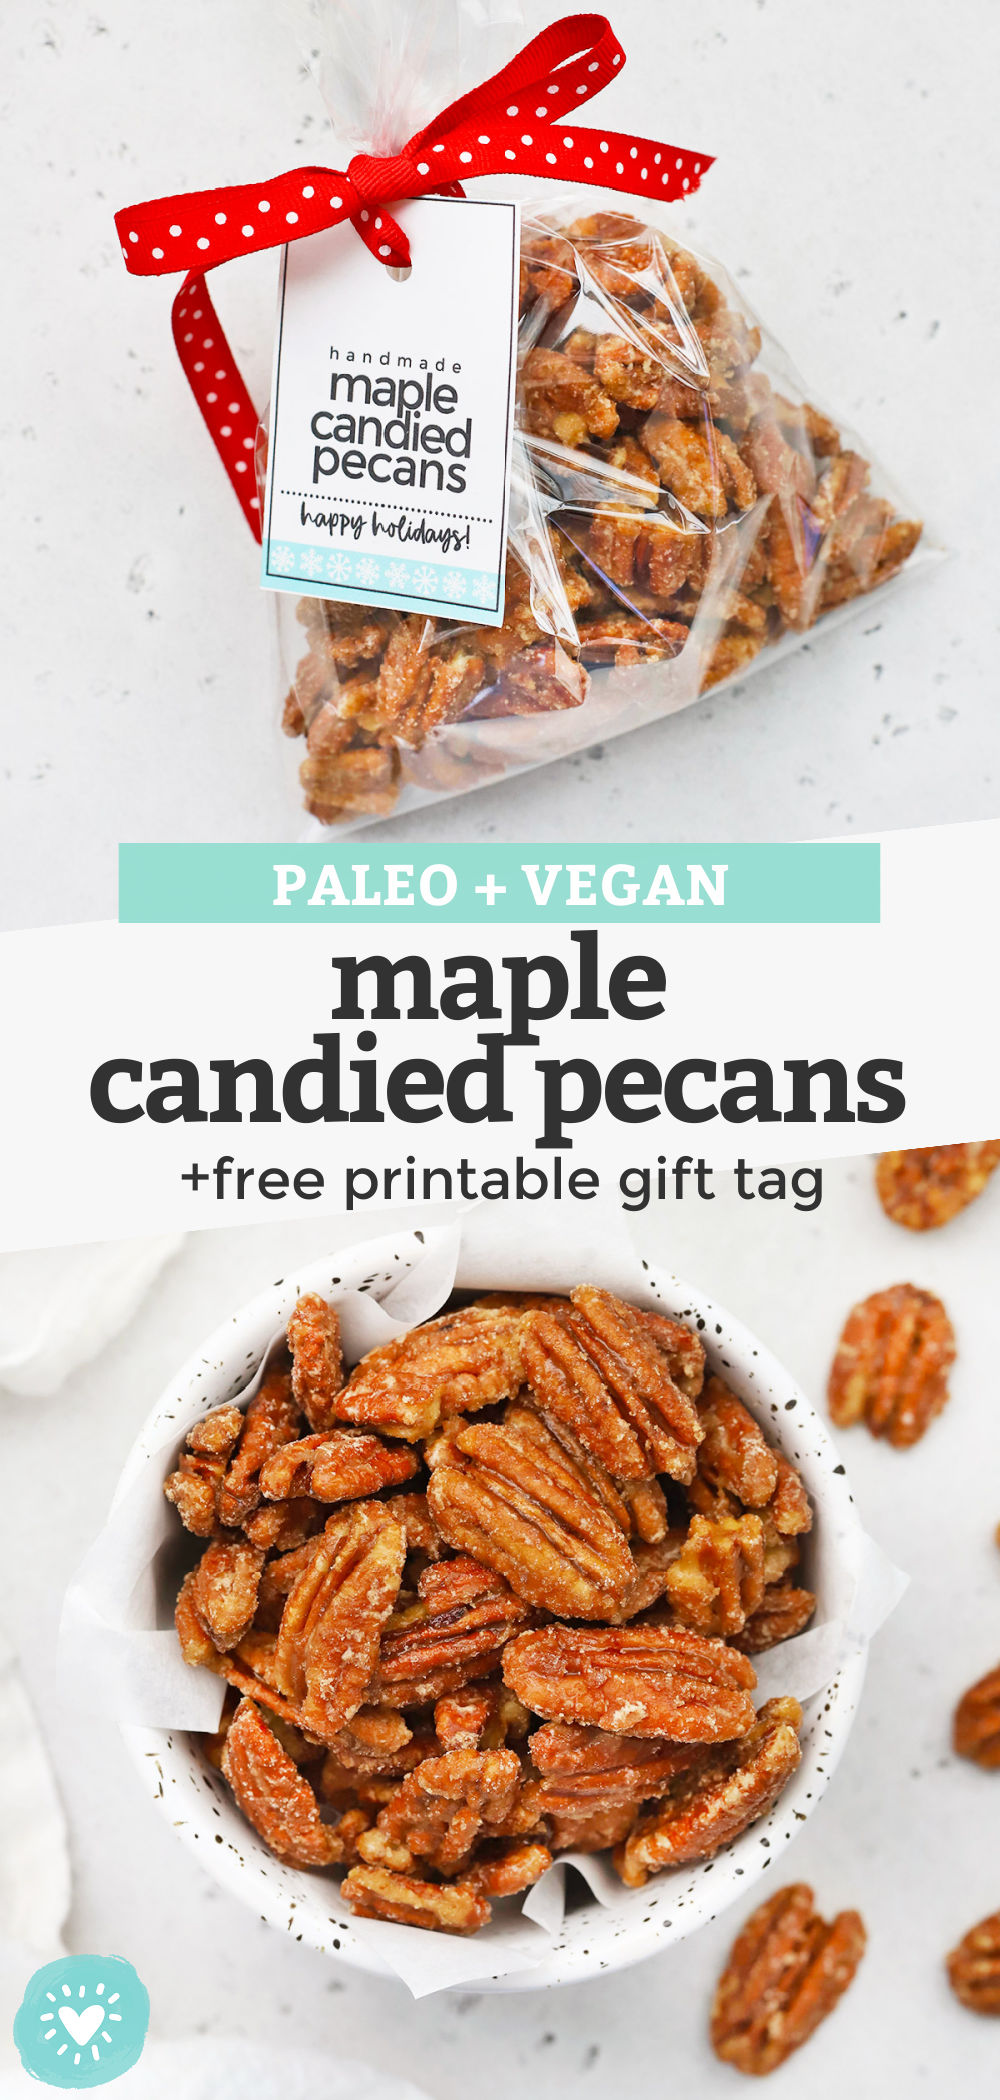 Maple Candied Pecans - These naturally sweetened candied pecans are PERFECT for snacking, holiday gifting, or topping your favorite salad. You'll love them as much as we do! Don't forget the free printable gift tag for gifting! (Paleo + Vegan) // Paleo Candied Pecans // Healthy Candied Pecans // Edible Gift // Holiday Gift // Printable Gift Tag // Cinnamon Candied Pecans #candiedpecans #ediblegift #holidaygift #gifttag